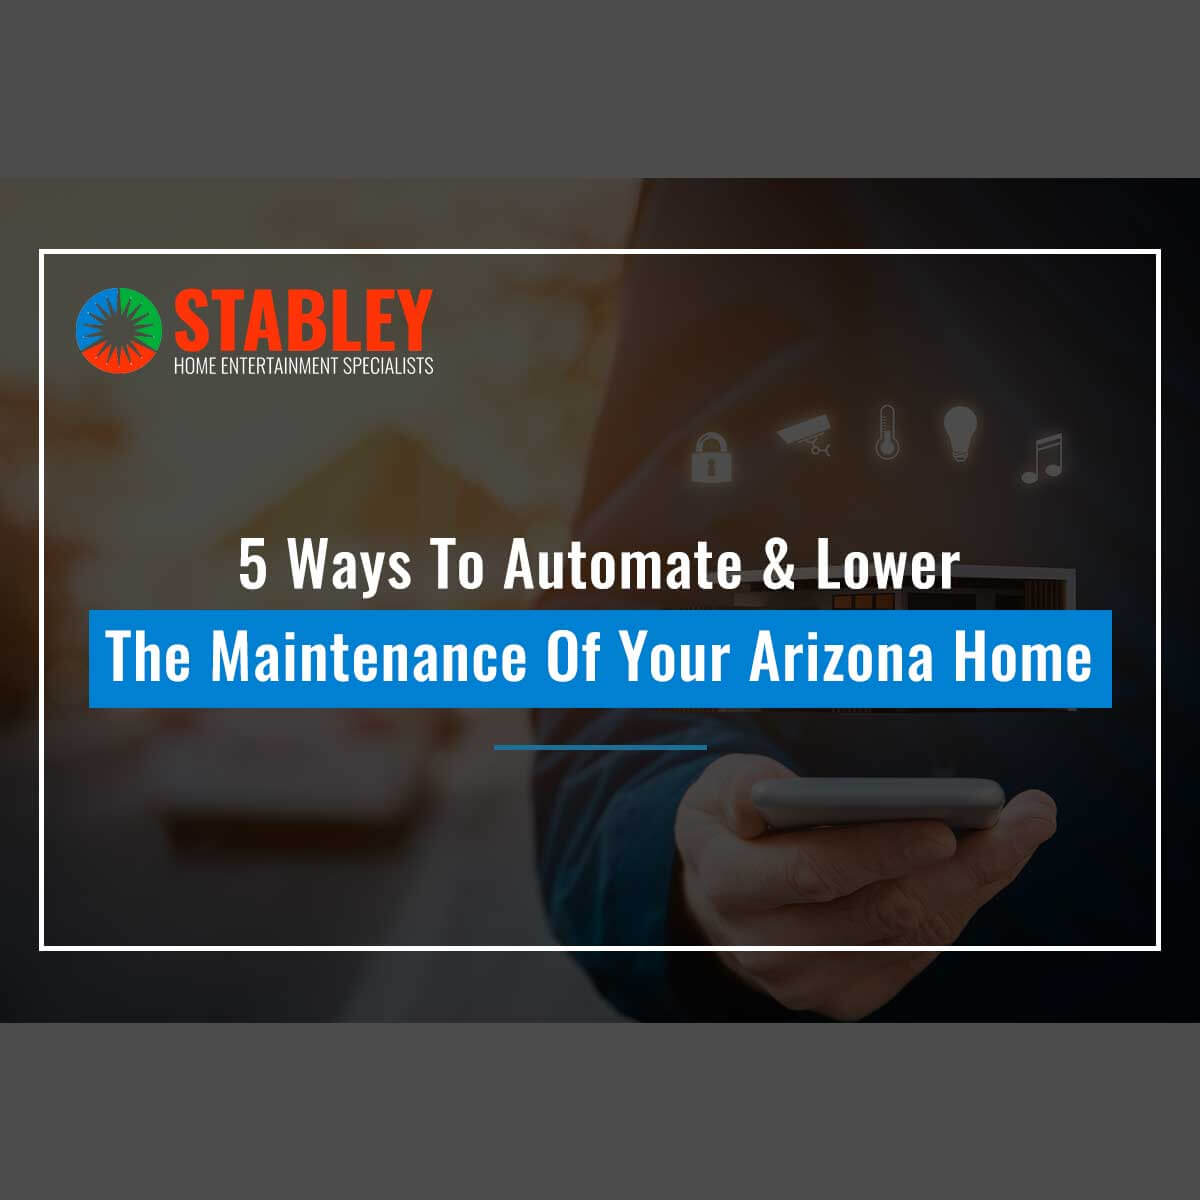 5 Ways To Automate & Lower The Maintenance Of Your Arizona Home